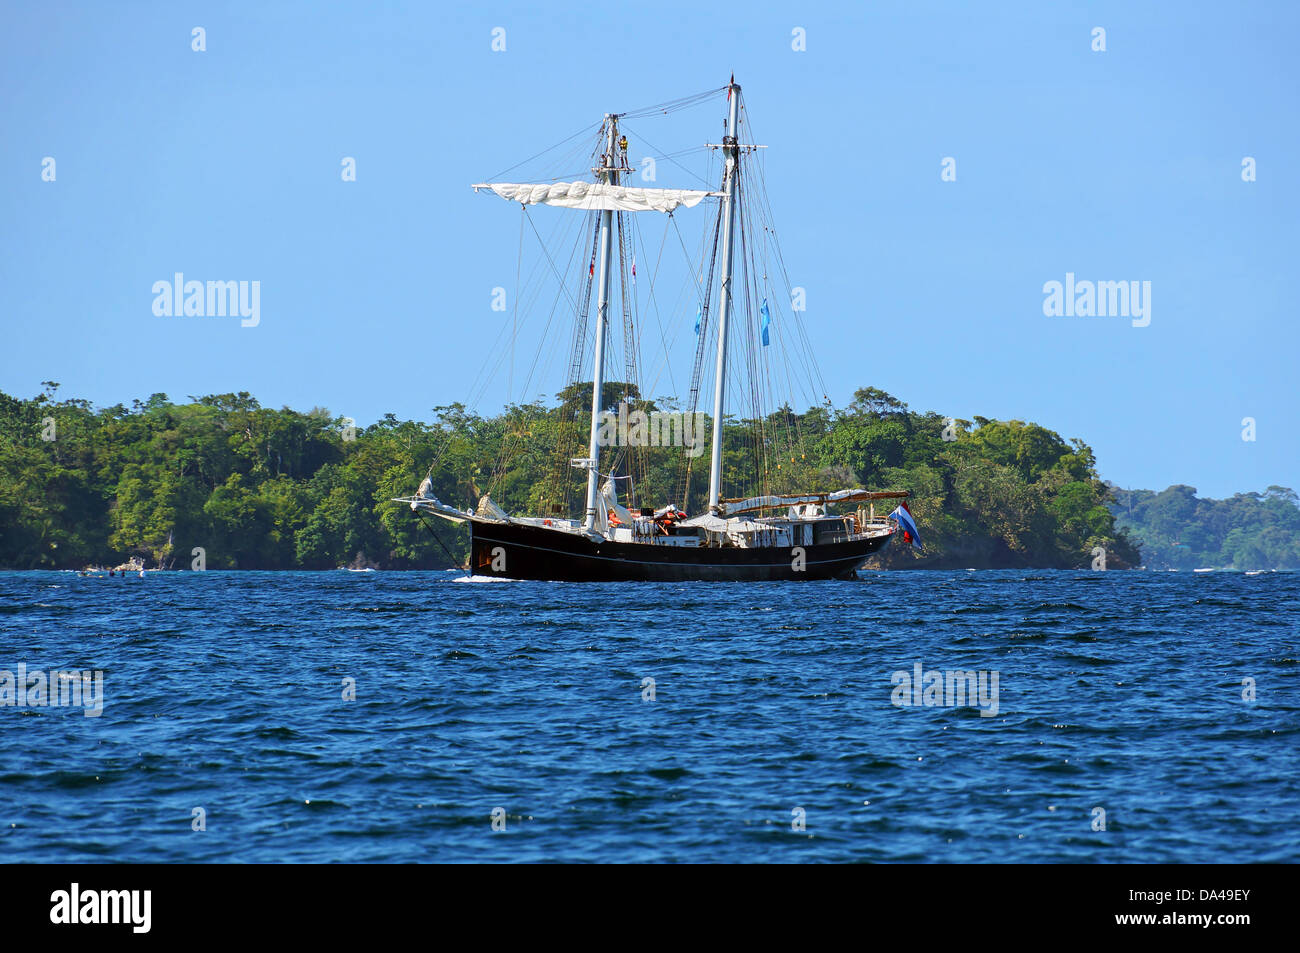 Beautiful sailing ship with a tropical island in background, Bocas del Toro, Panama Stock Photo